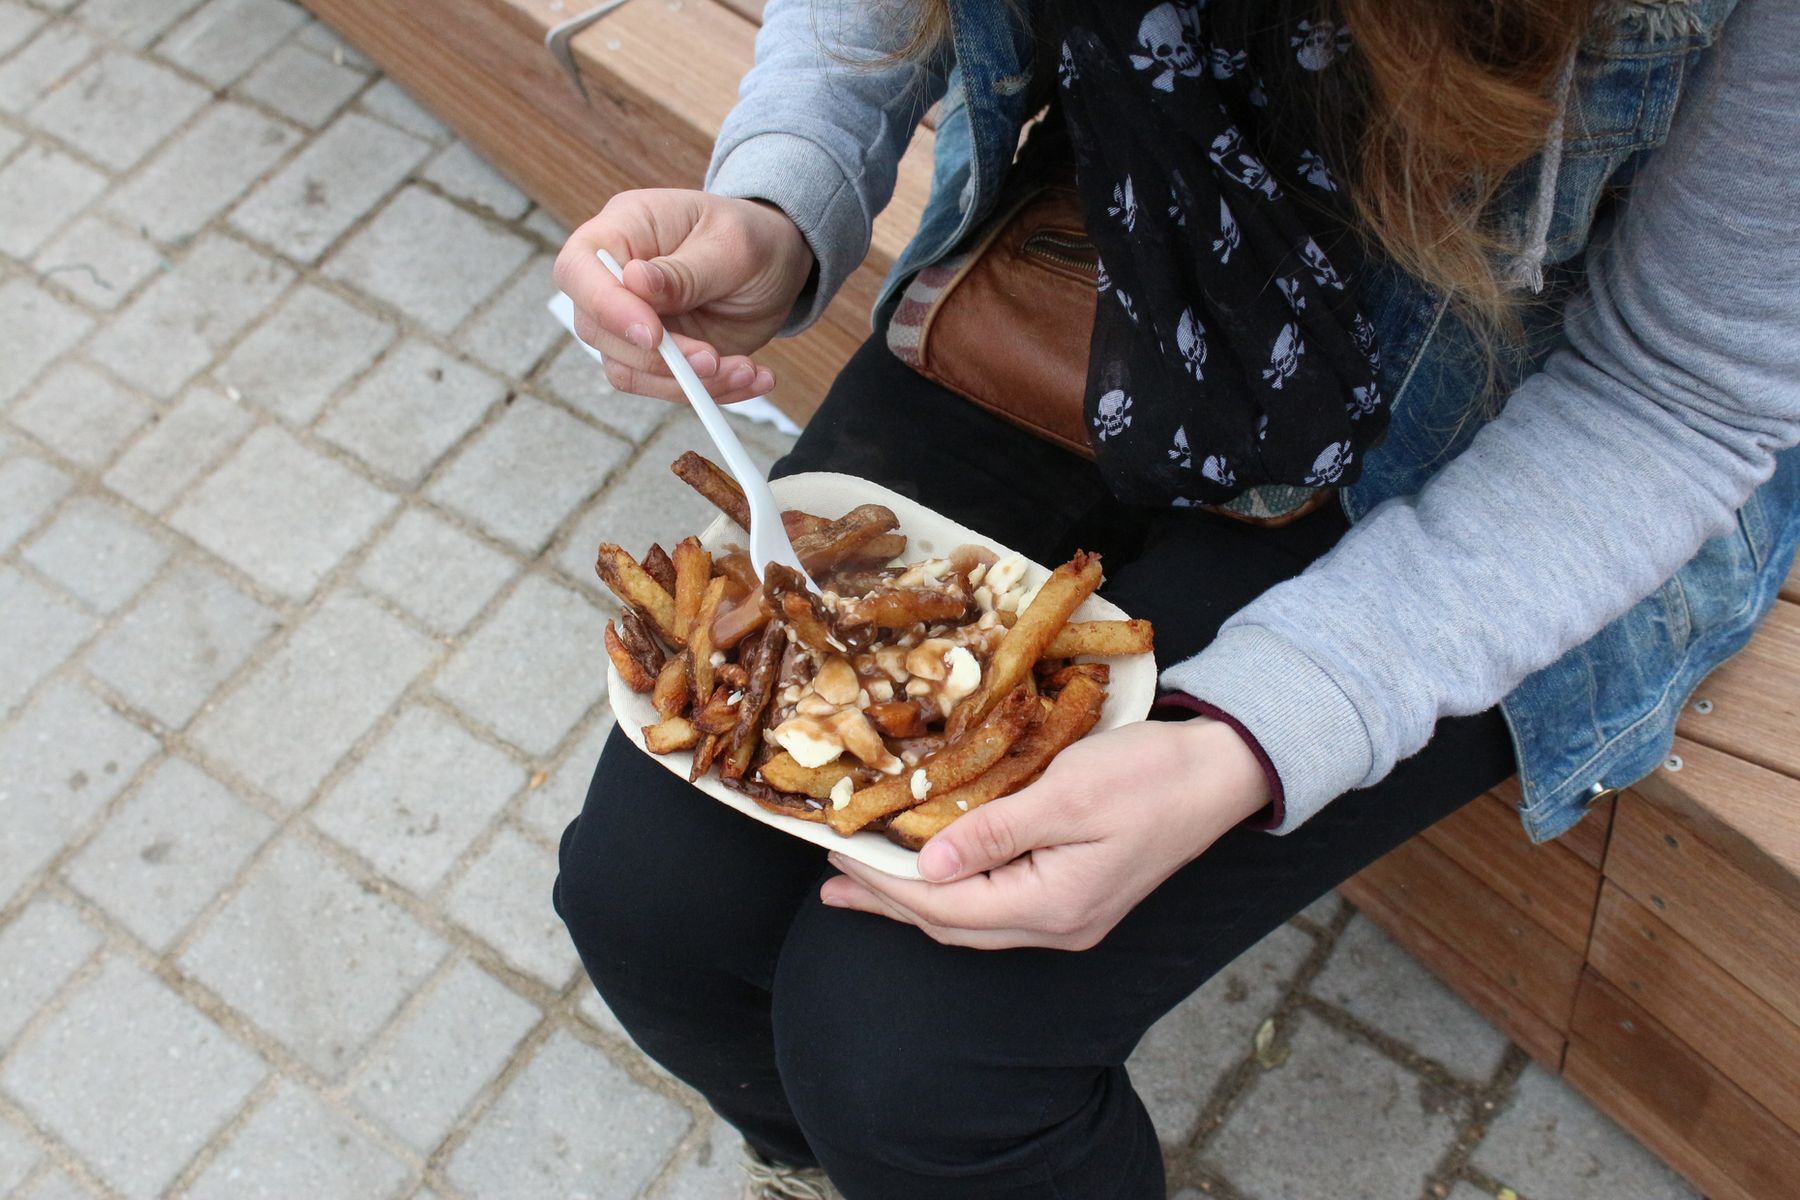 <p>Morning, noon, and night, poutine can be made in 1,001 ways to please all palates, but the classic version features three essential ingredients: <a href="https://labanquise.com/en/poutine-history.php" rel="noreferrer noopener">fries, cheese curds, and brown gravy</a>. This comforting and filling trio that can be found throughout Quebec.</p>